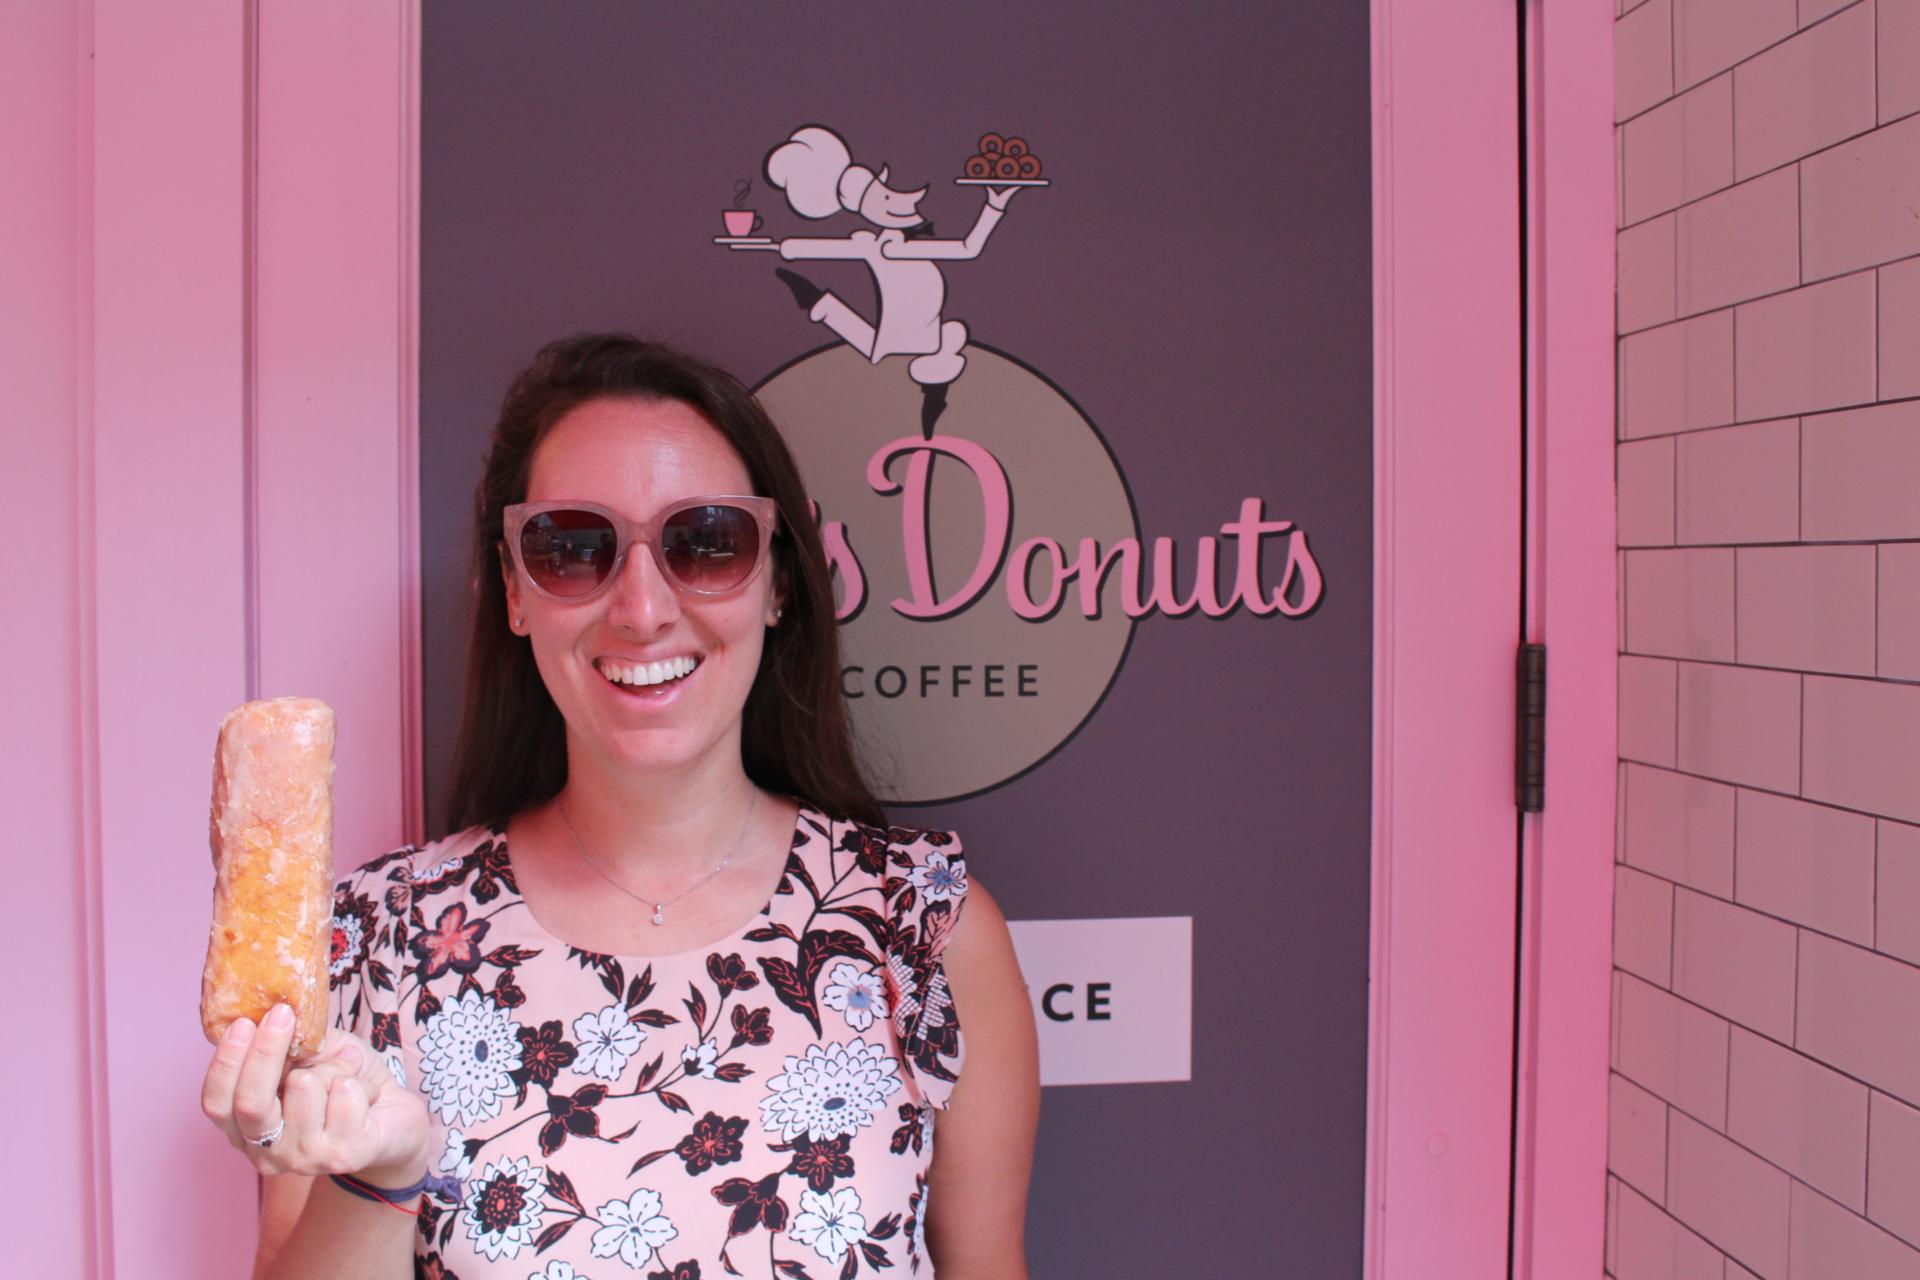 TRAVEL: A Girl and Her Windy City Donut(s) - A Girl and the Best Donuts in Chicago by popular New Jersey foodie blogger What's For Dinner Esq.